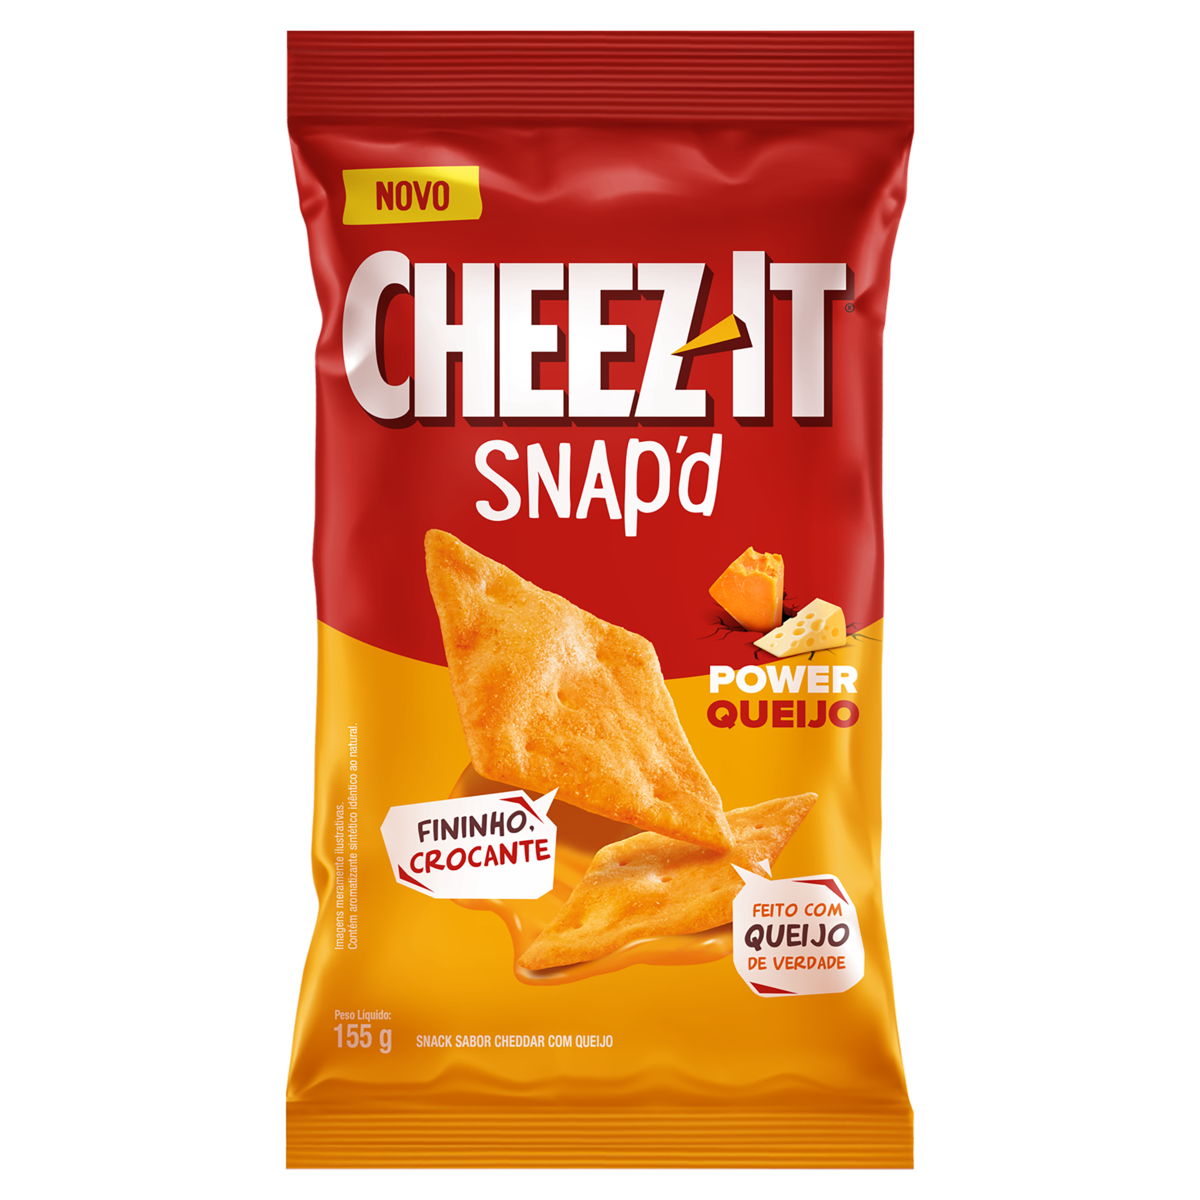 7896004007816 - SNACK POWER QUEIJO CHEEZ-IT SNAPD PACOTE 155G